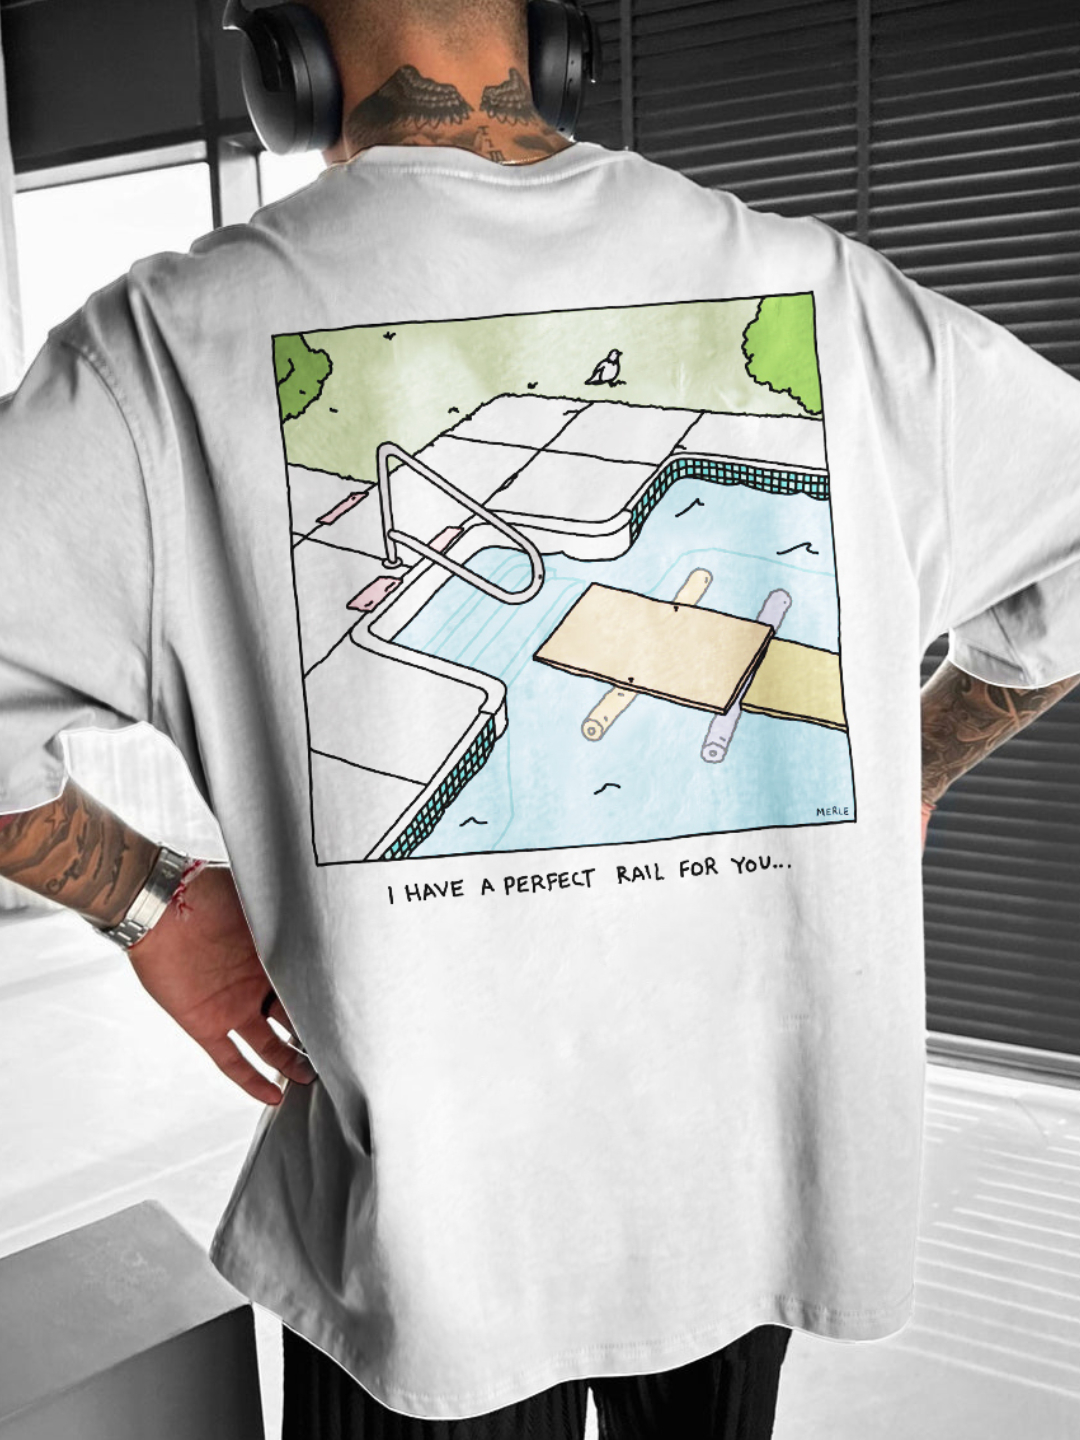 "I have a perfect rail for you..." Skate T-shirt